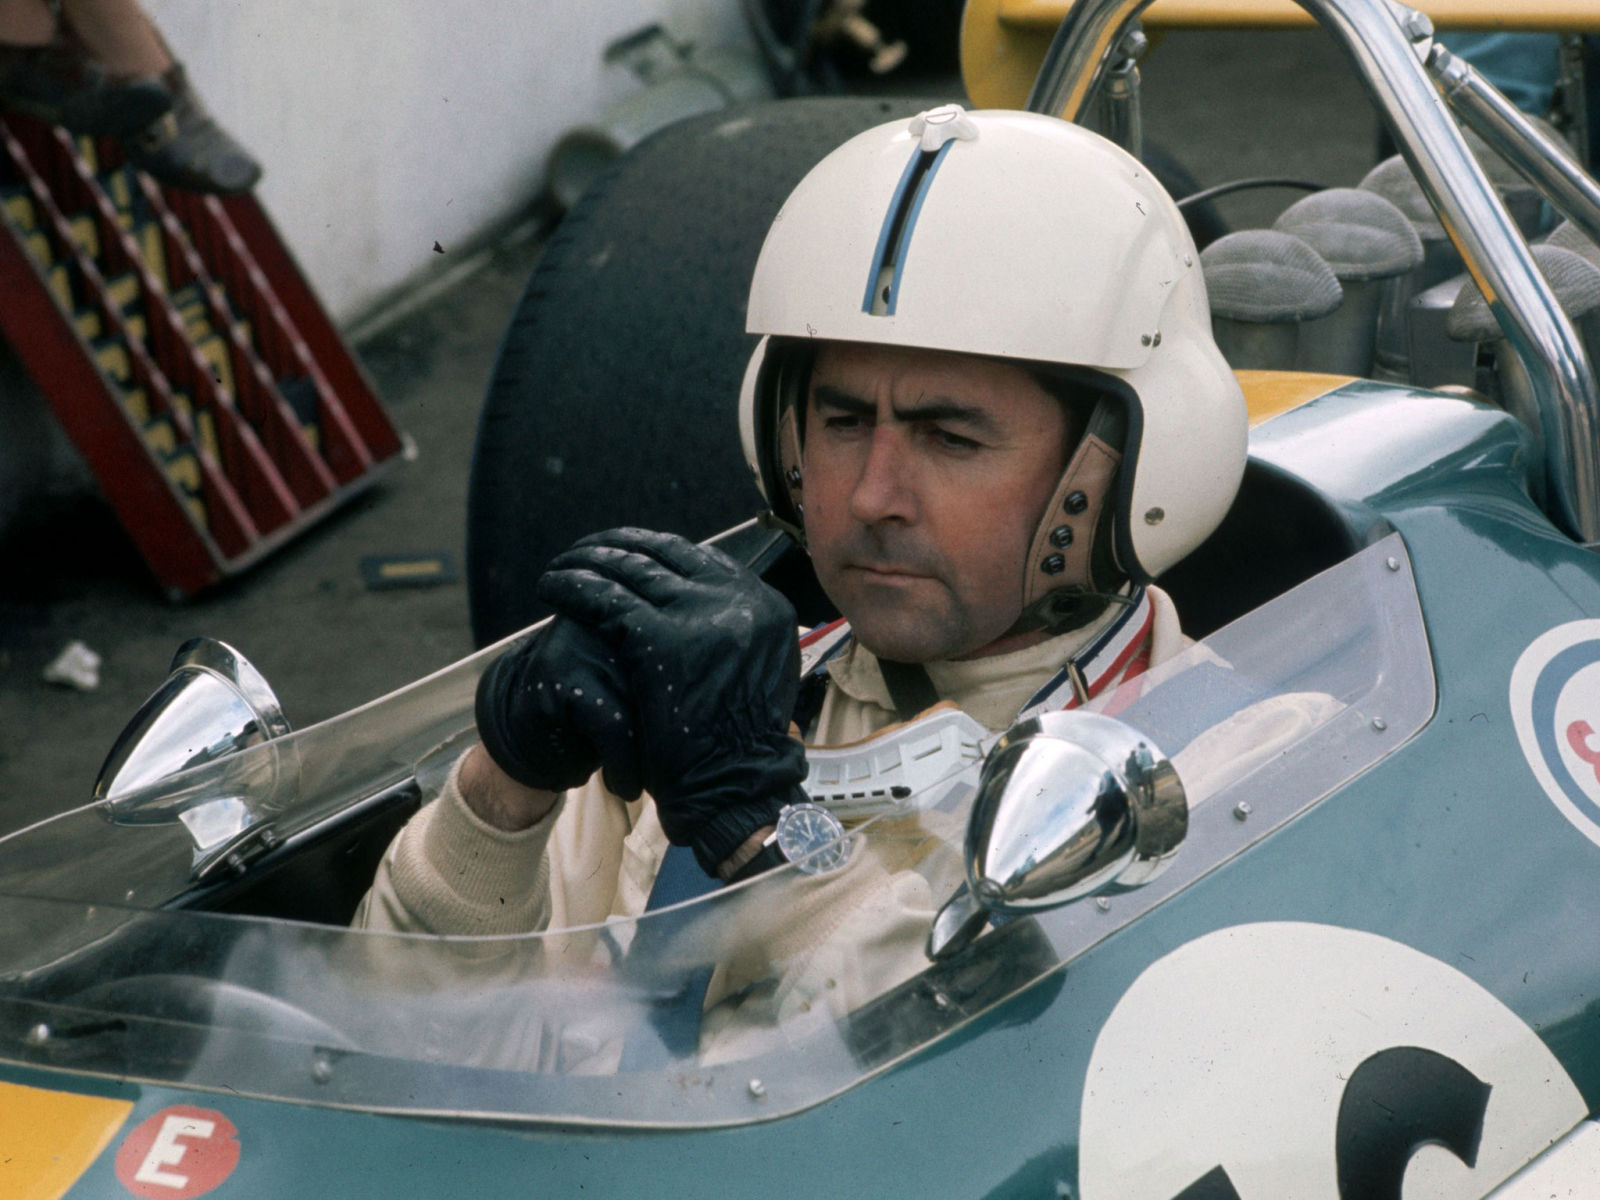 Sir Jack Brabham, who became champion driving his own car